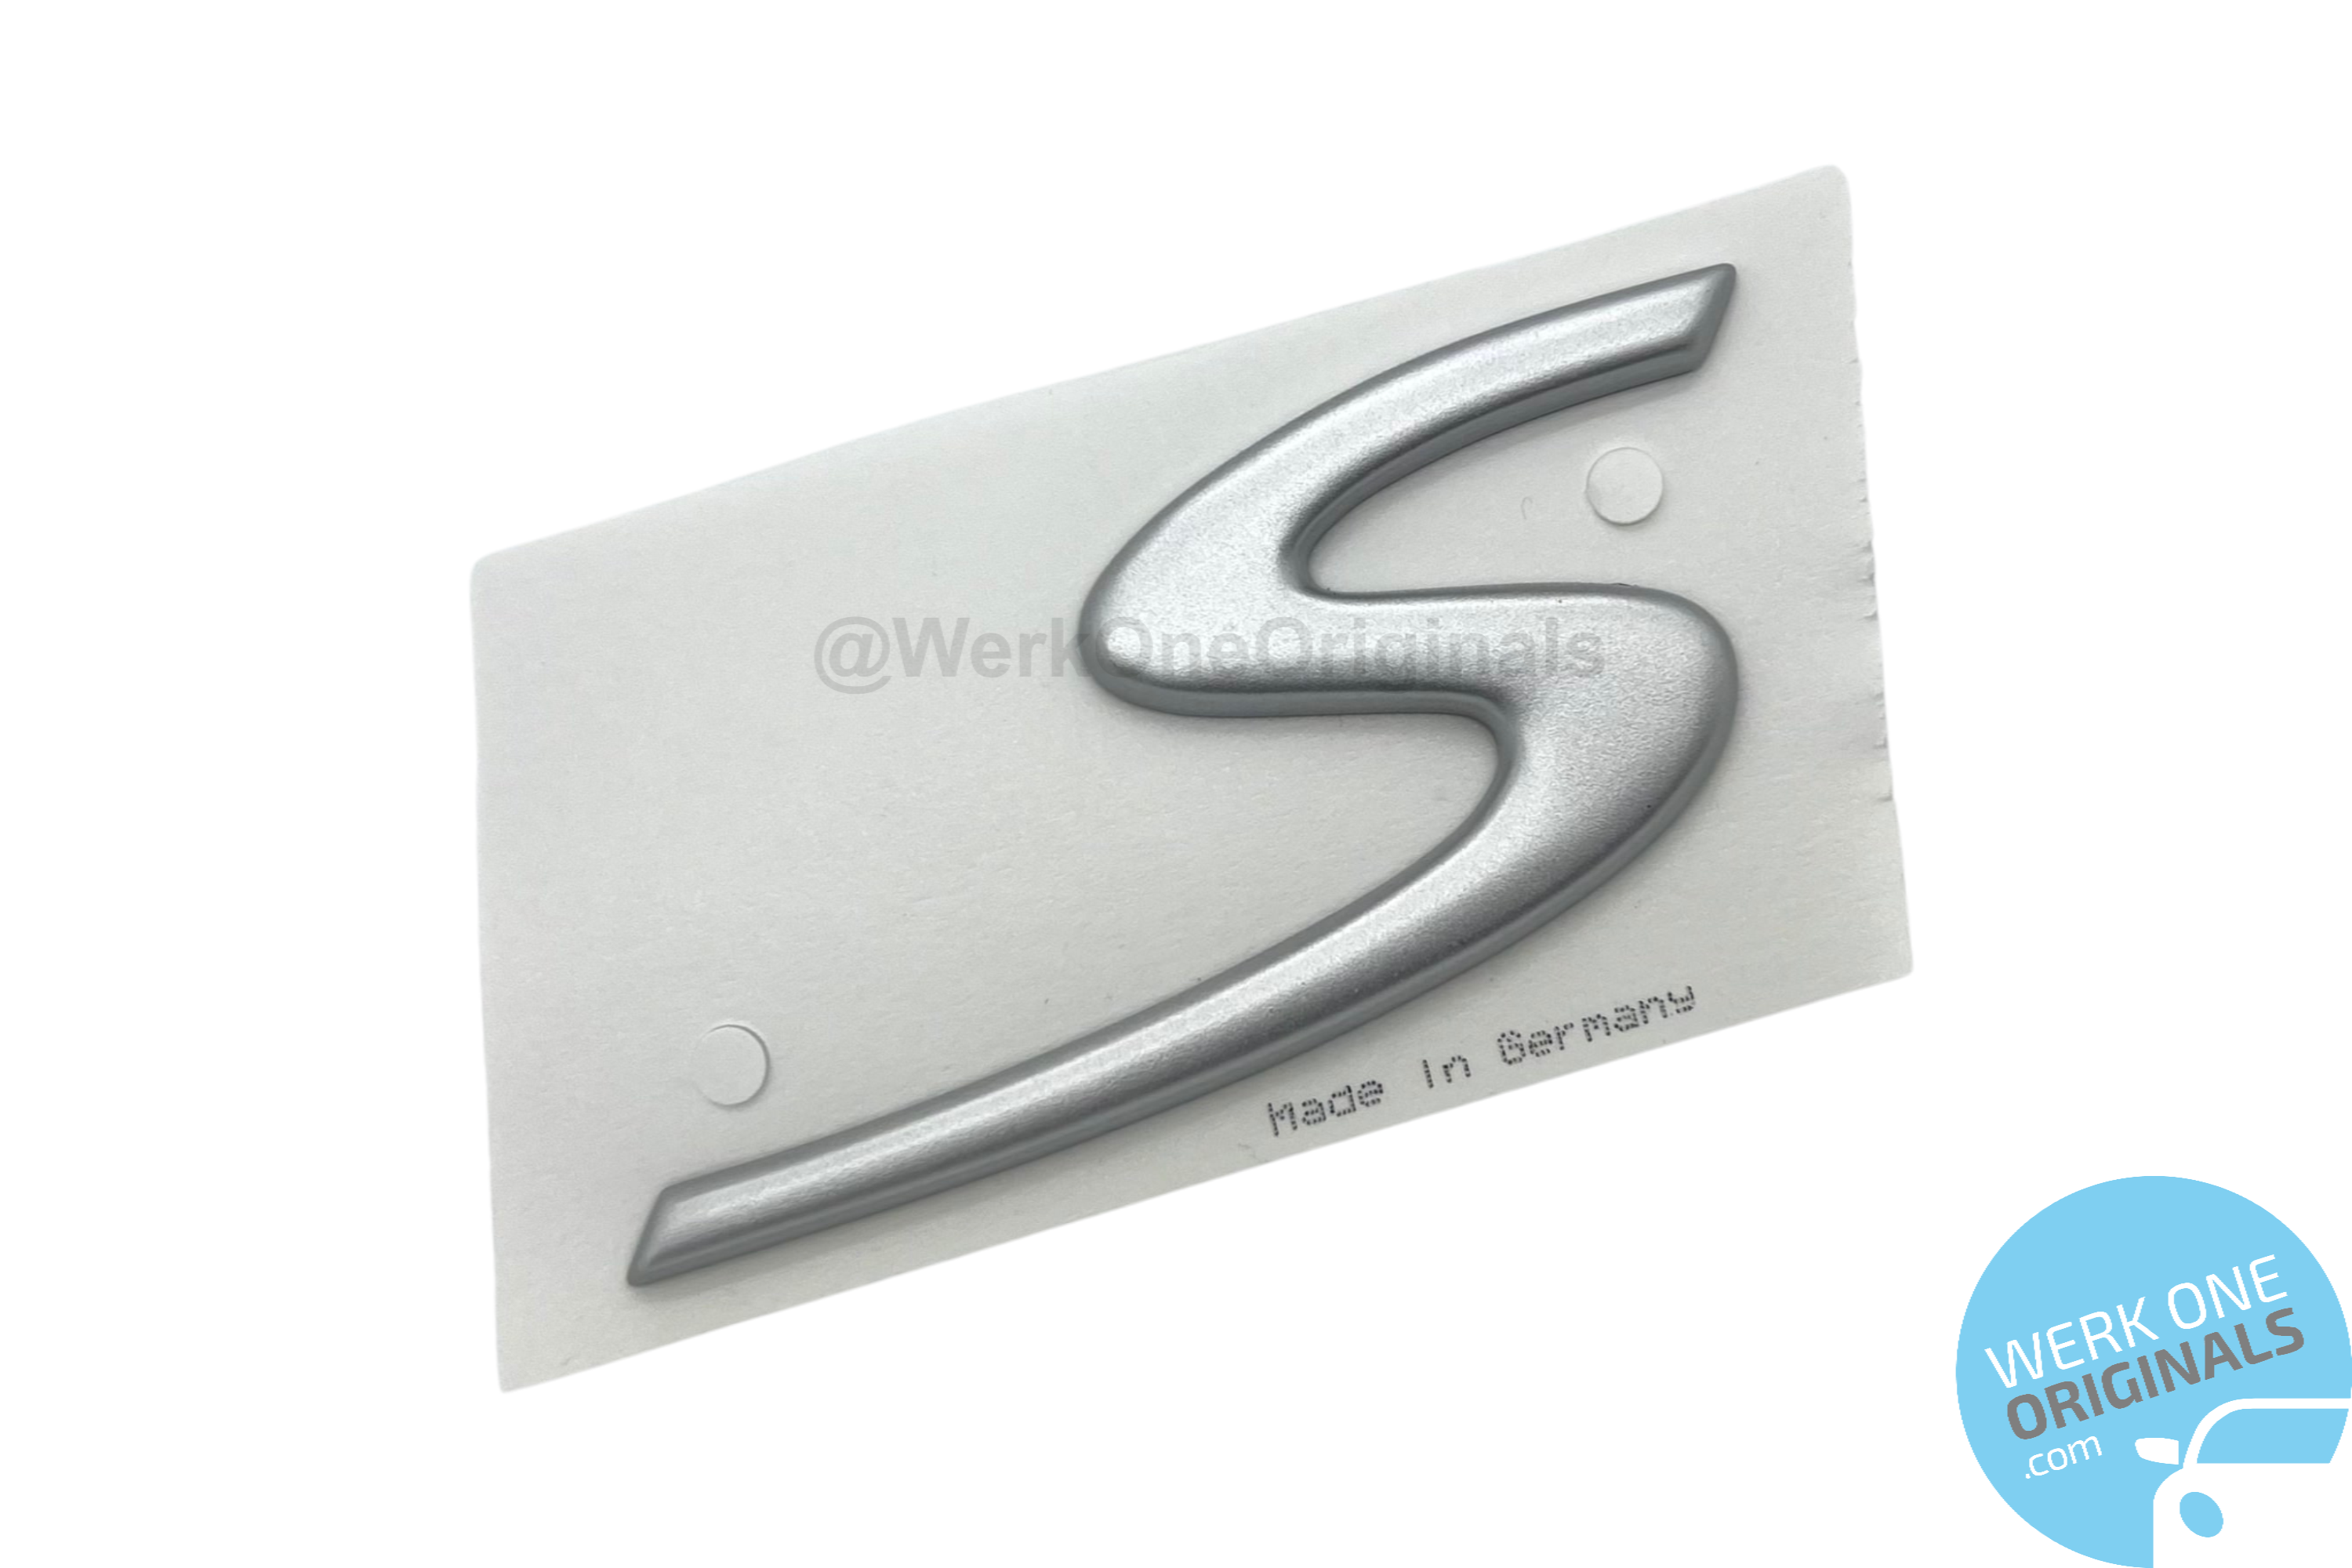 Porsche 'S' Rear Badge Decal in Matte Silver for 911 Type 997 Carrera S Models